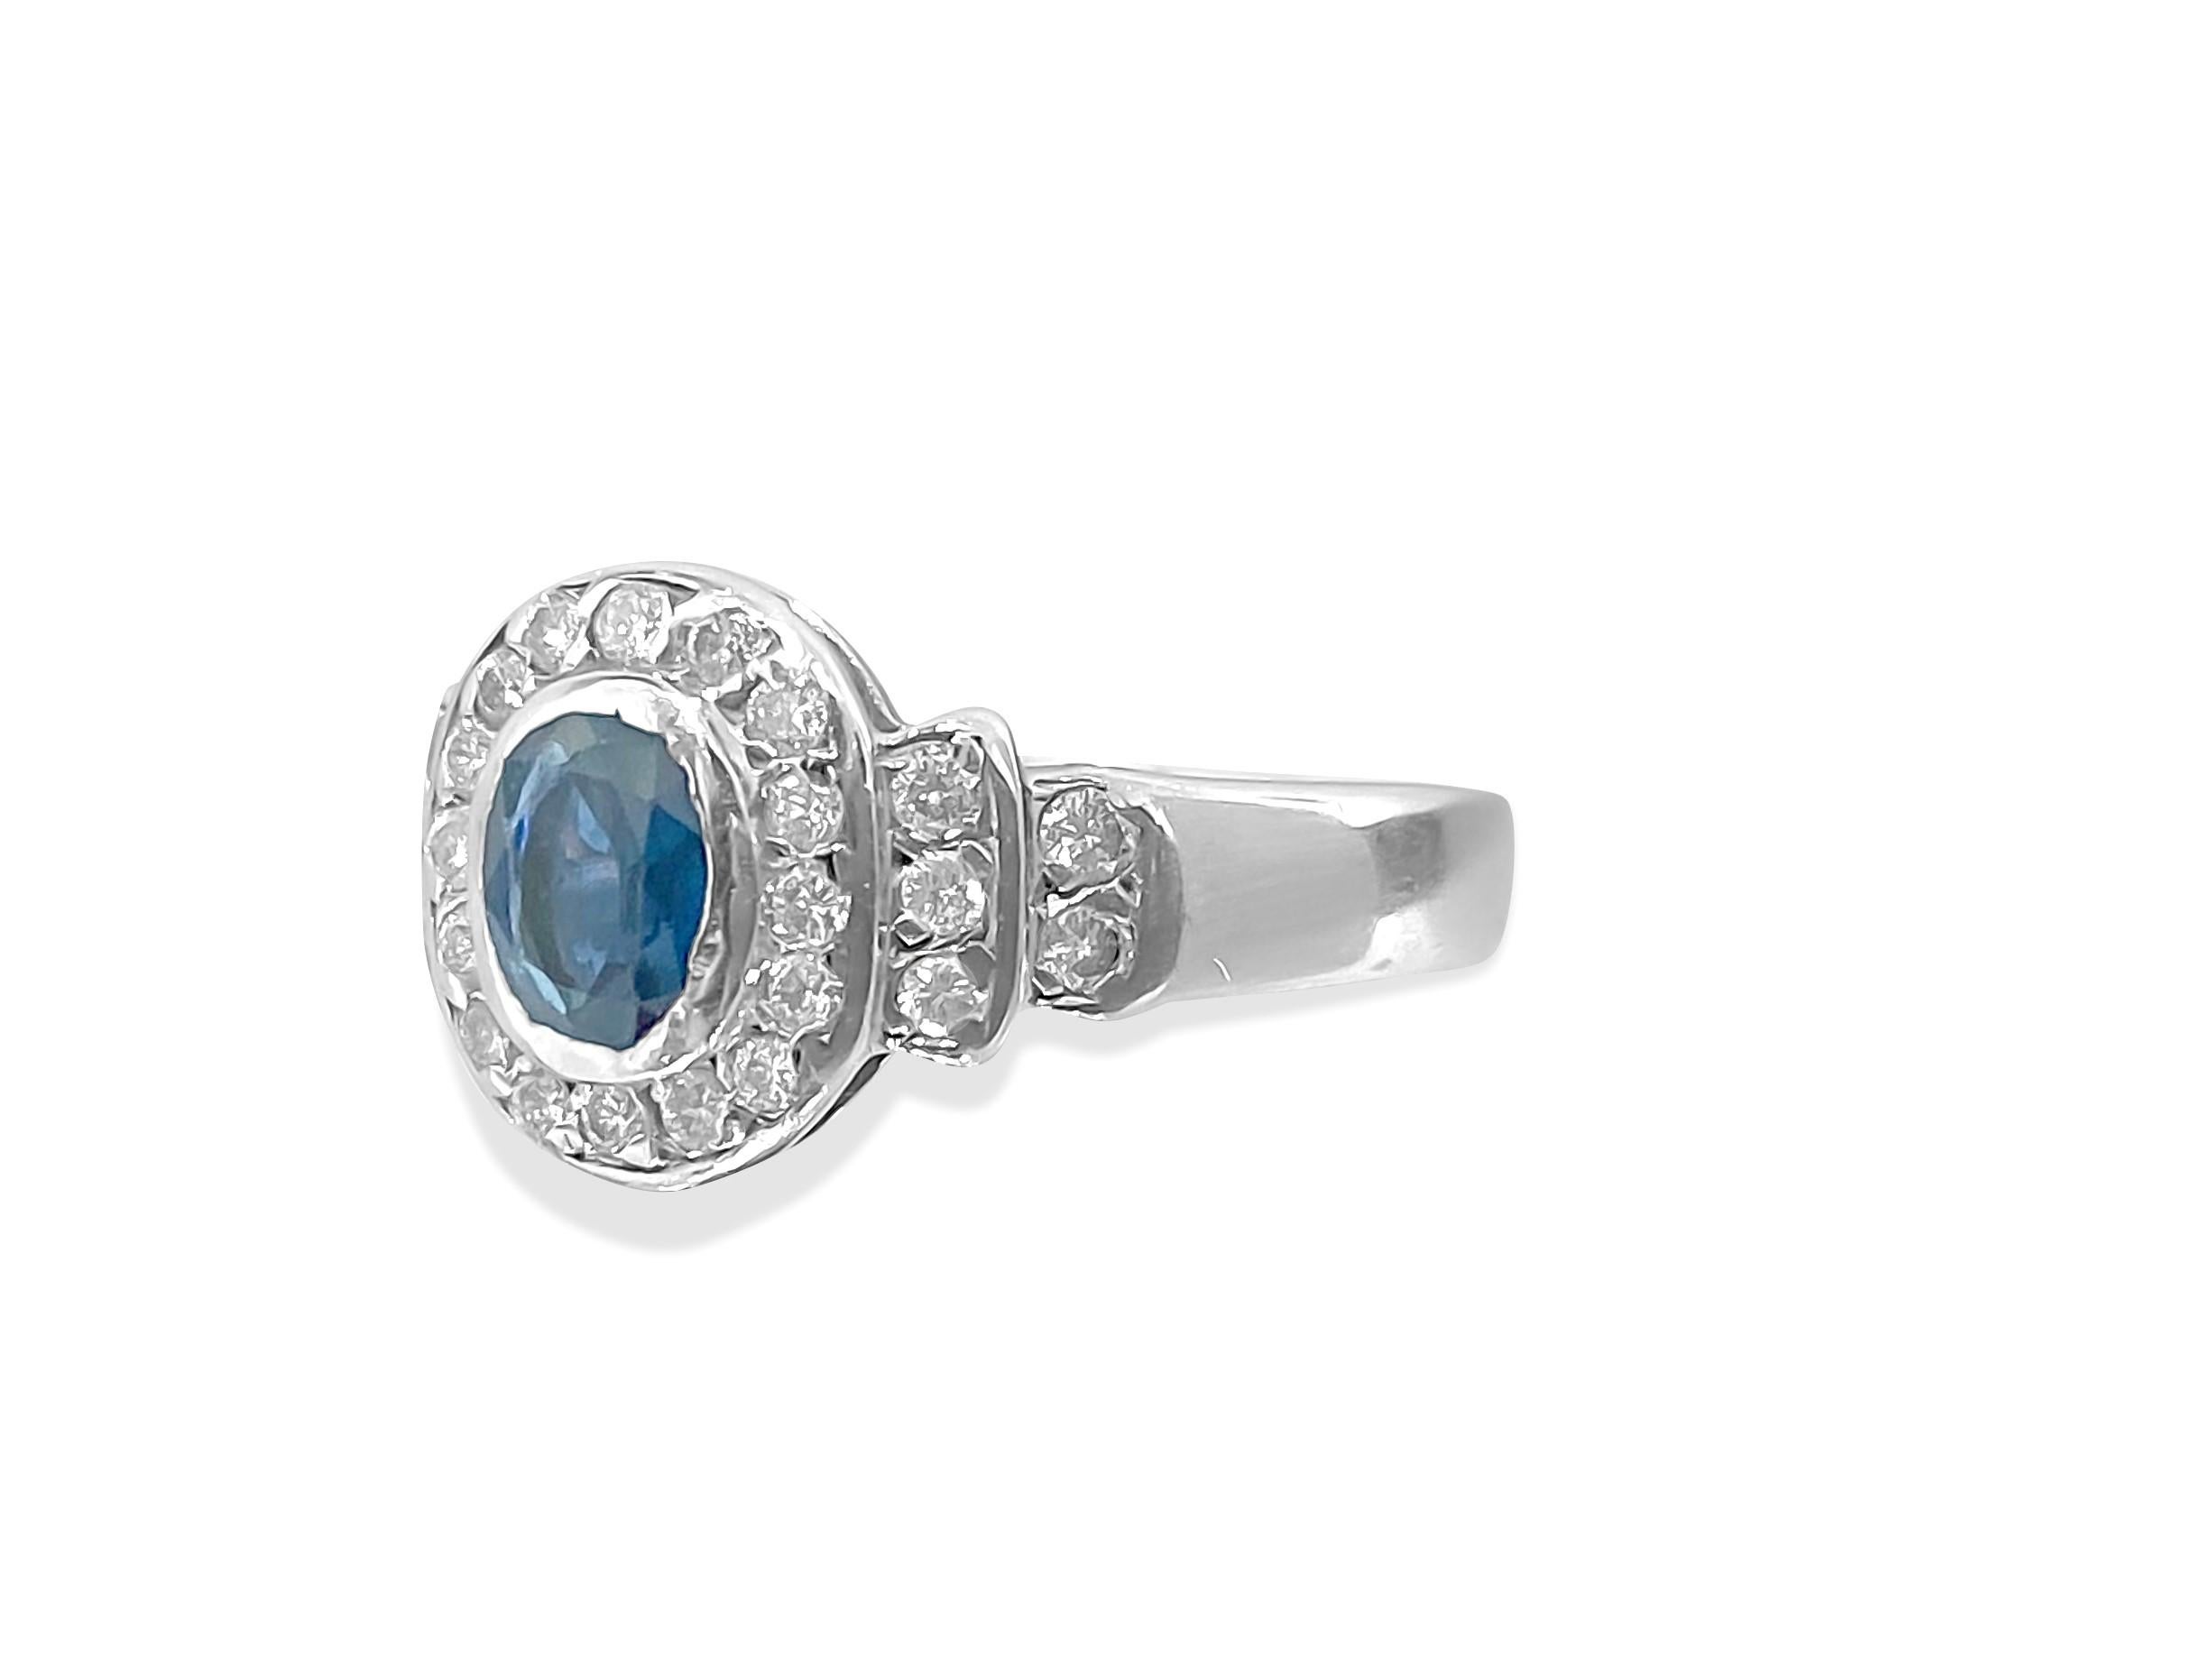 - Metal: 18k white gold. 1.50 carat blue sapphire, oval cut. 
- TCW of the diamonds: 1.25 carats. 
- VVS Clarity and F color diamonds.
- All precious stones are 100% natural earth mined and genuine. 
- Womens diamond and blue sapphire ring. Ring